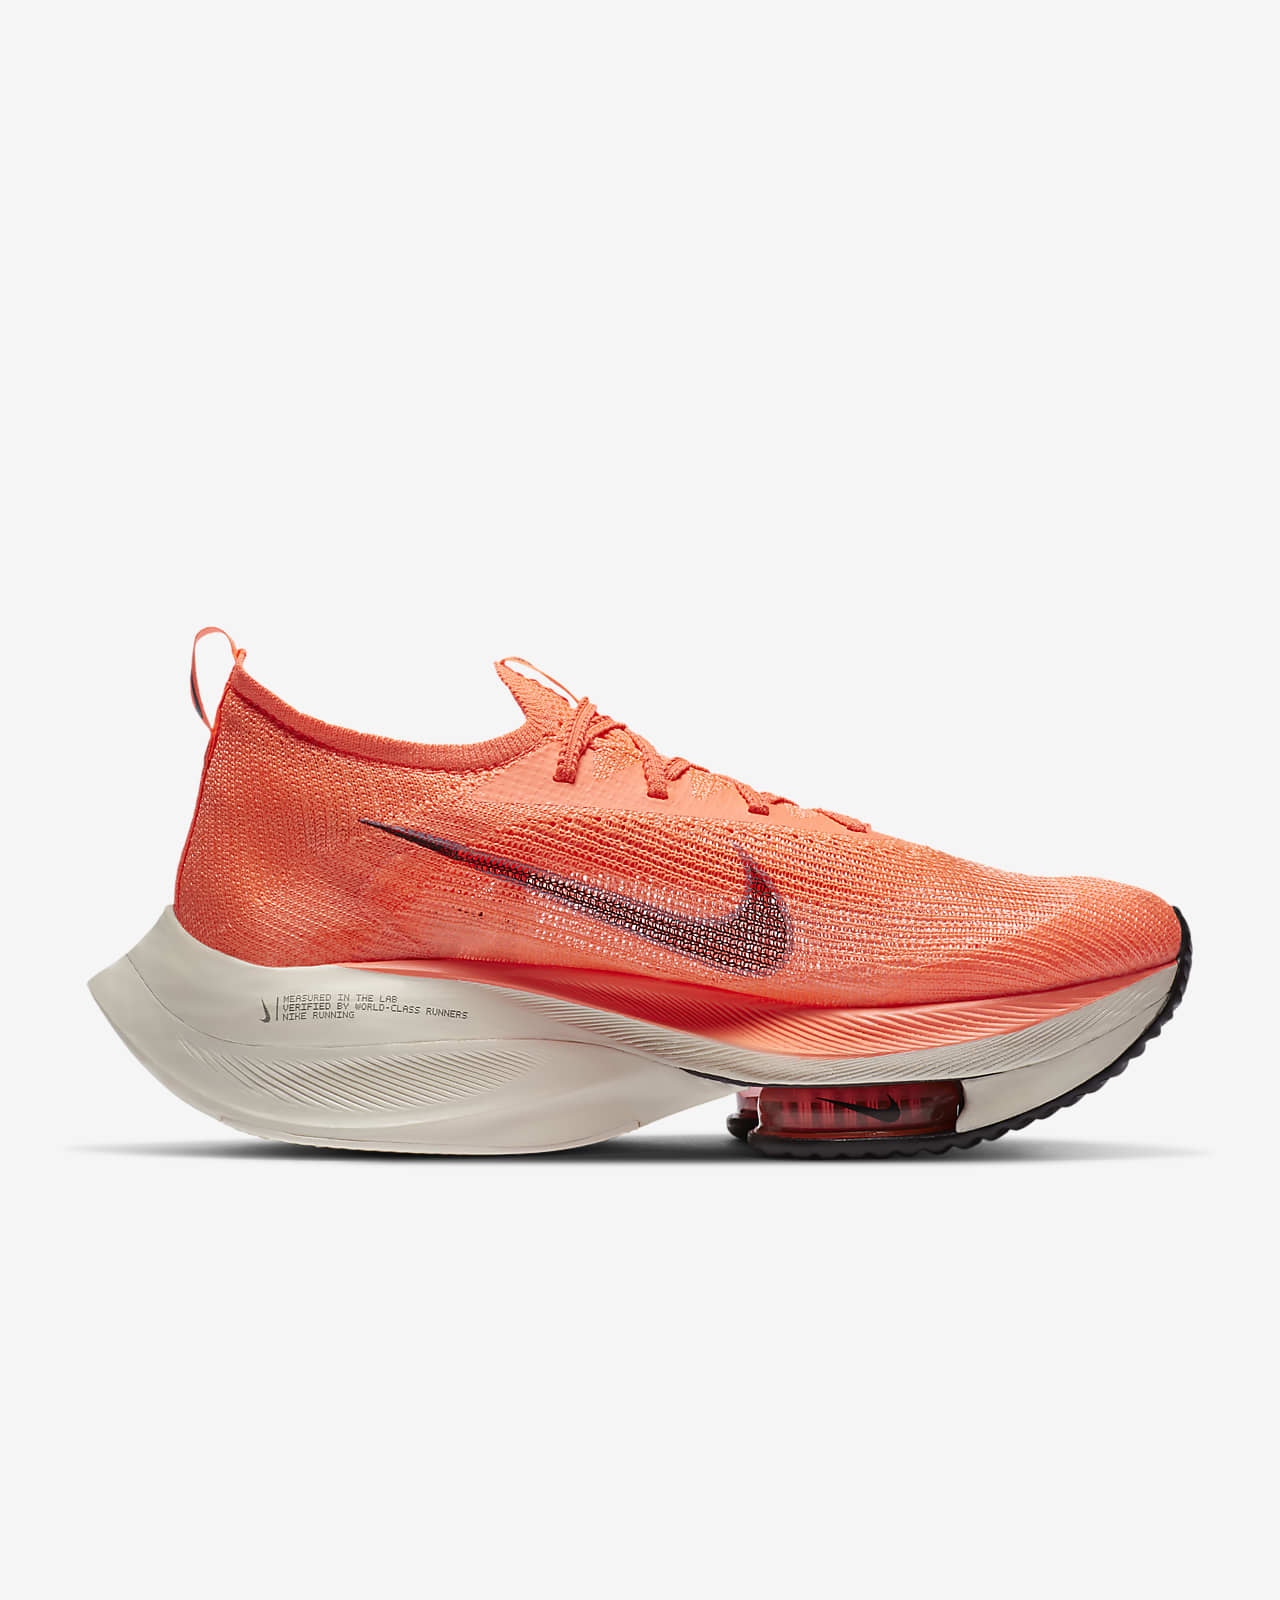 nike air zoomx alphafly next